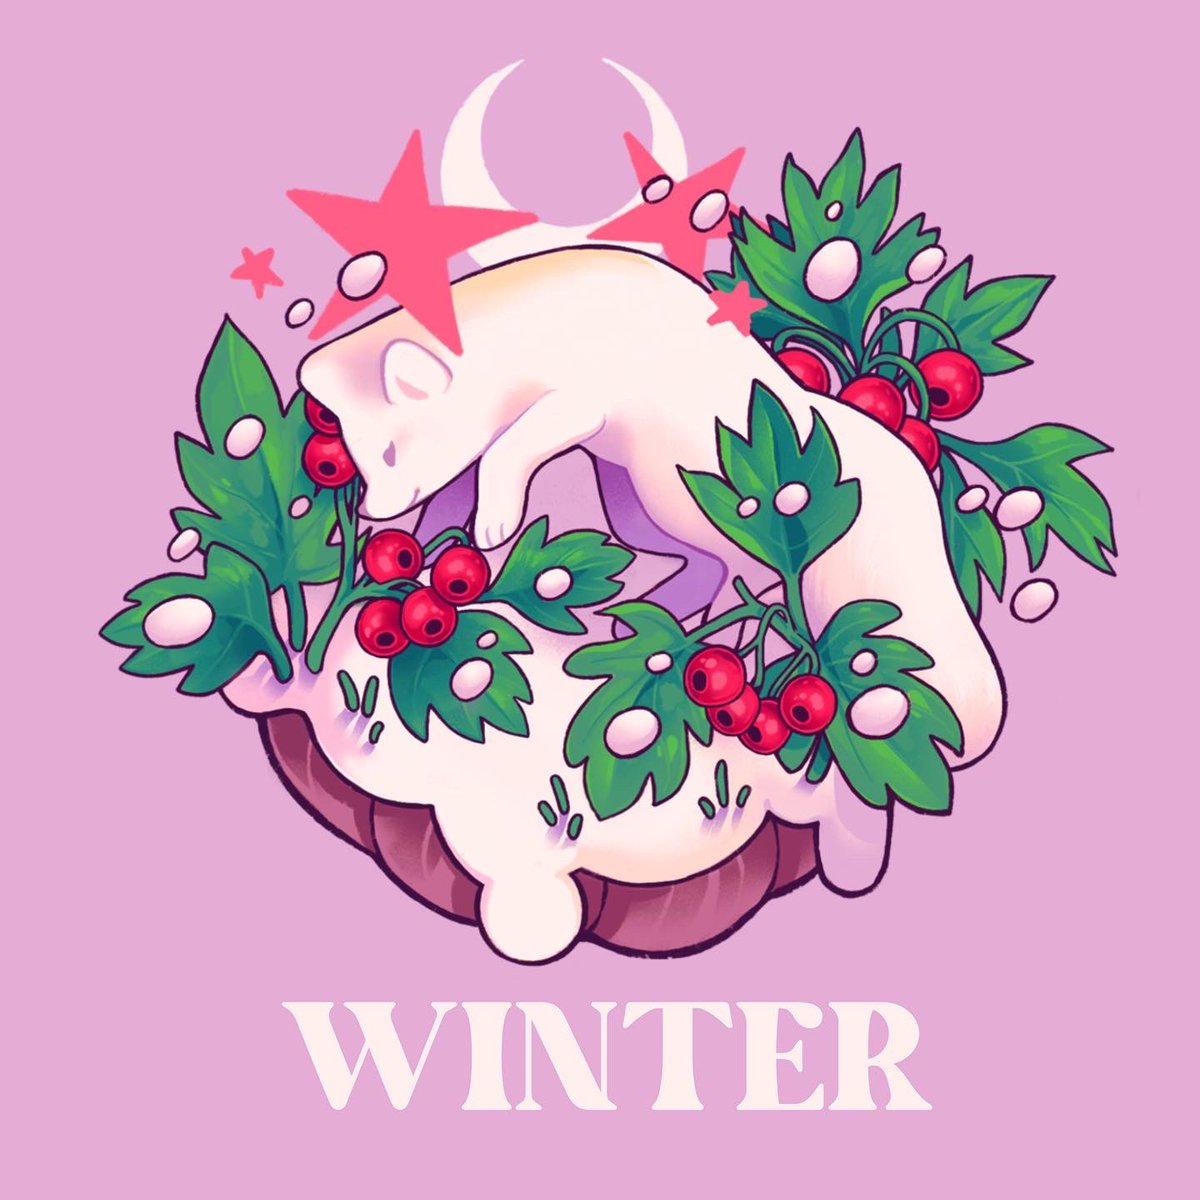 「A winter fox ! He's doin a jump 👏✨✨ 」|🌿lana 🌿 SHOP OPEN Bat fairy collection live ❤️のイラスト